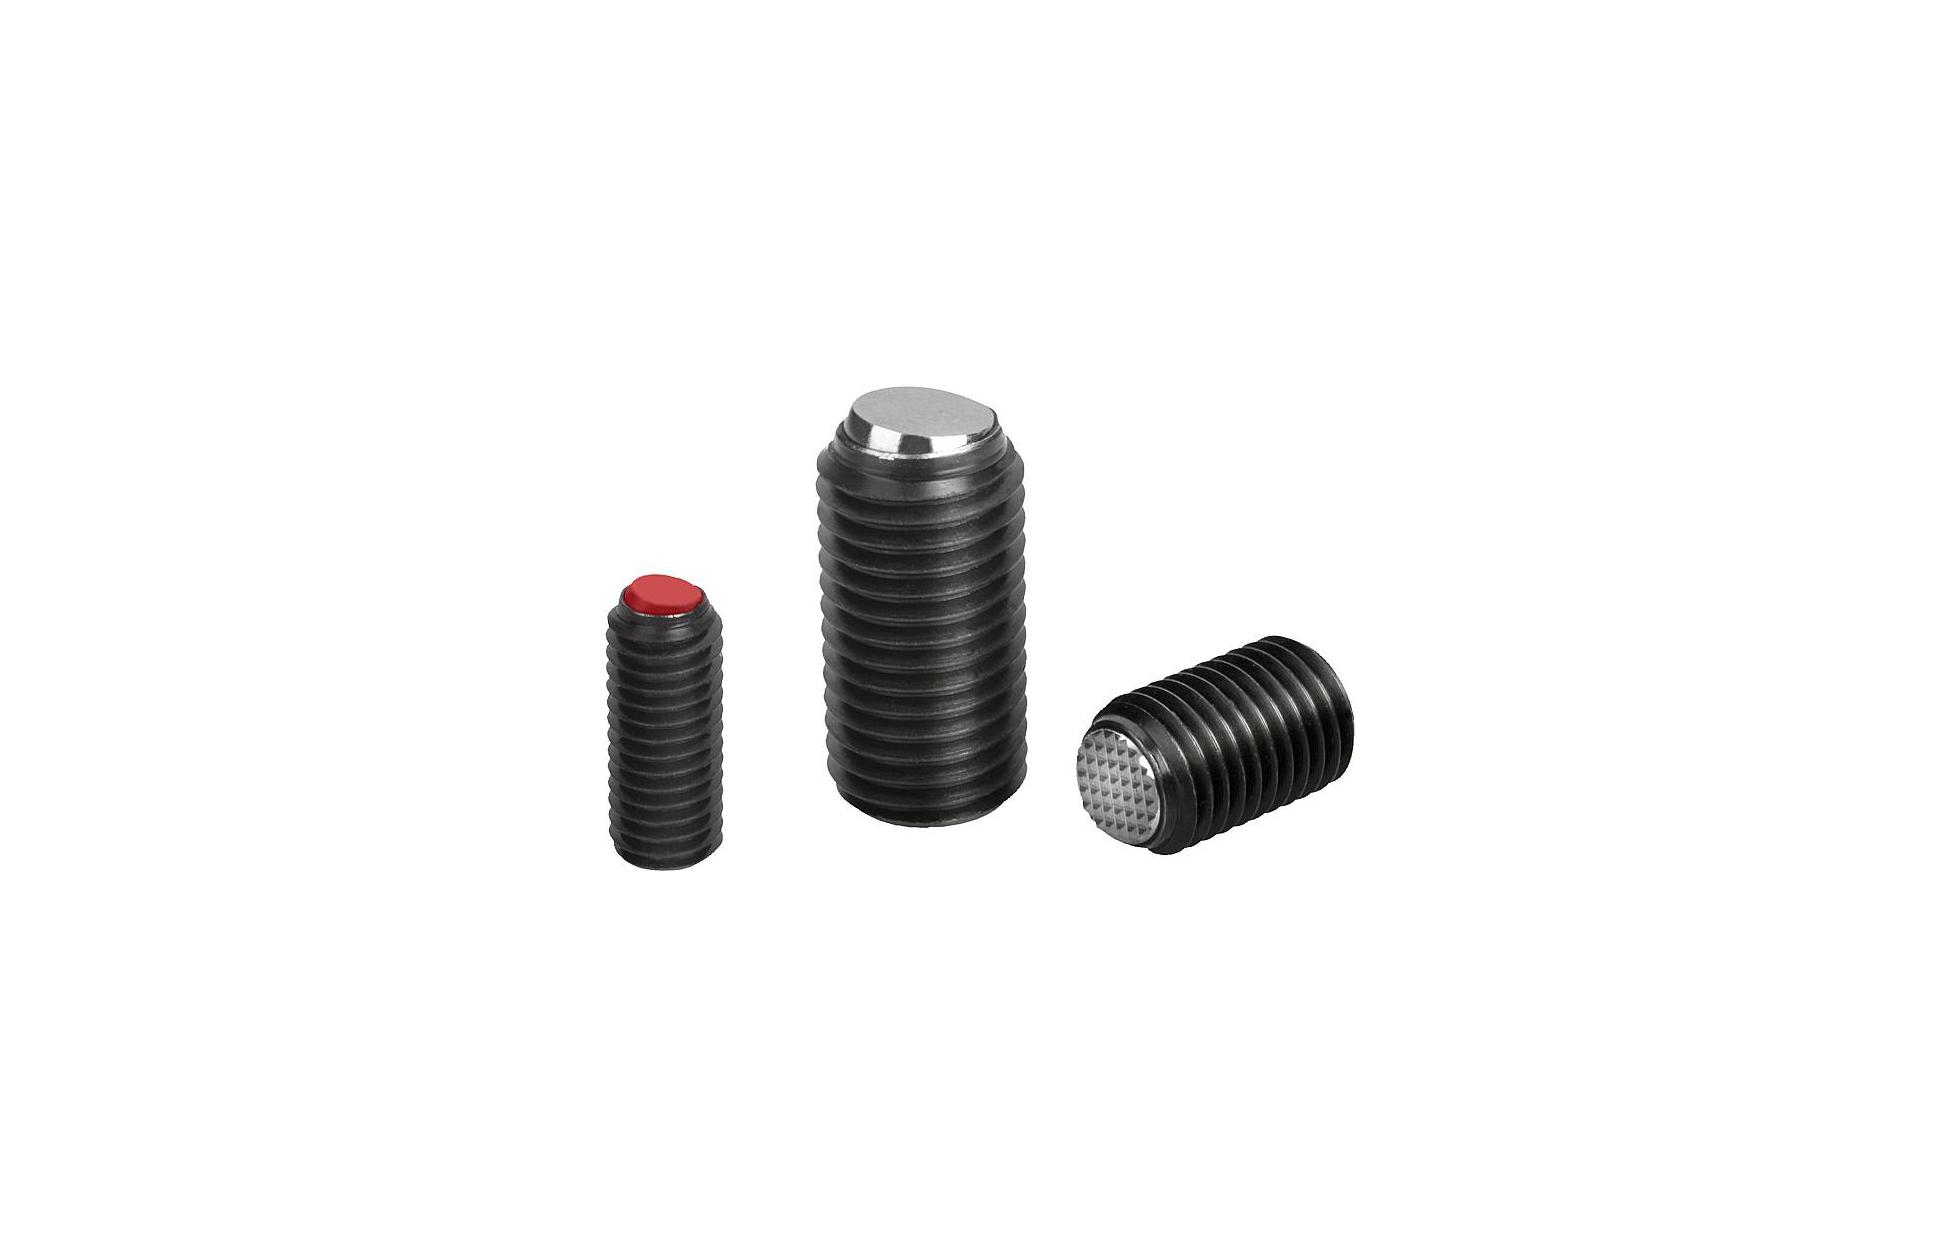 K0383 Ball-end thrust screws without head with flattened ball